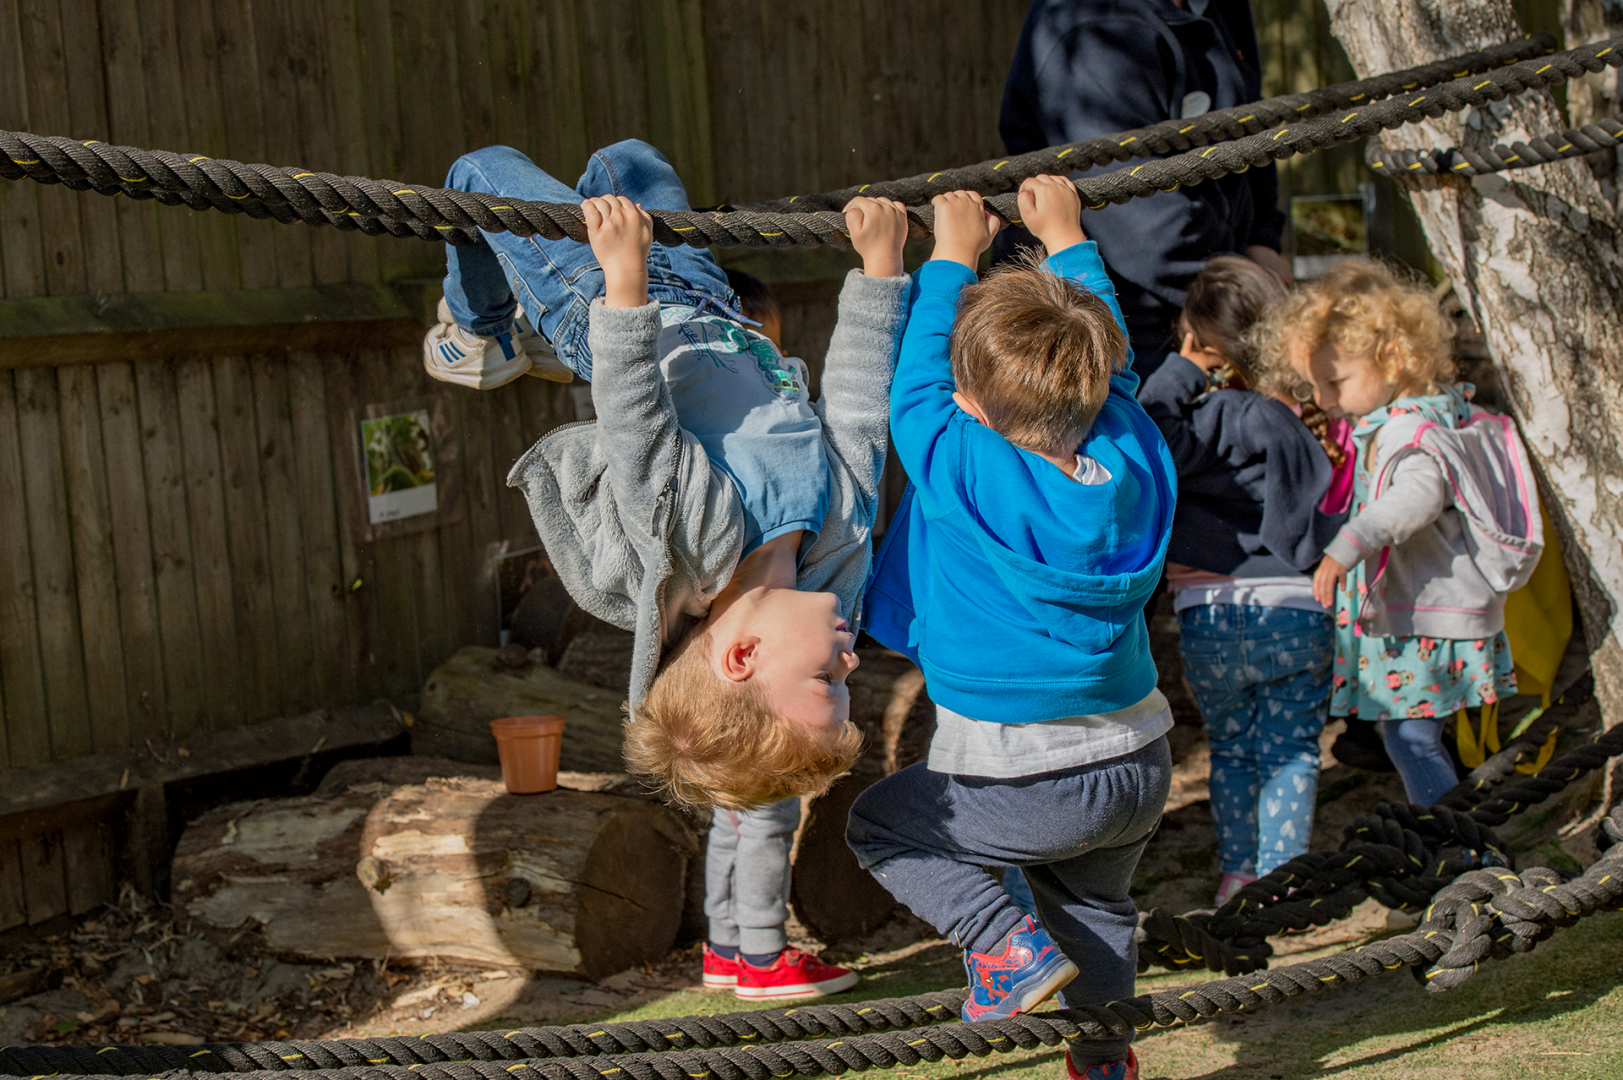 Children playing on a rope safely